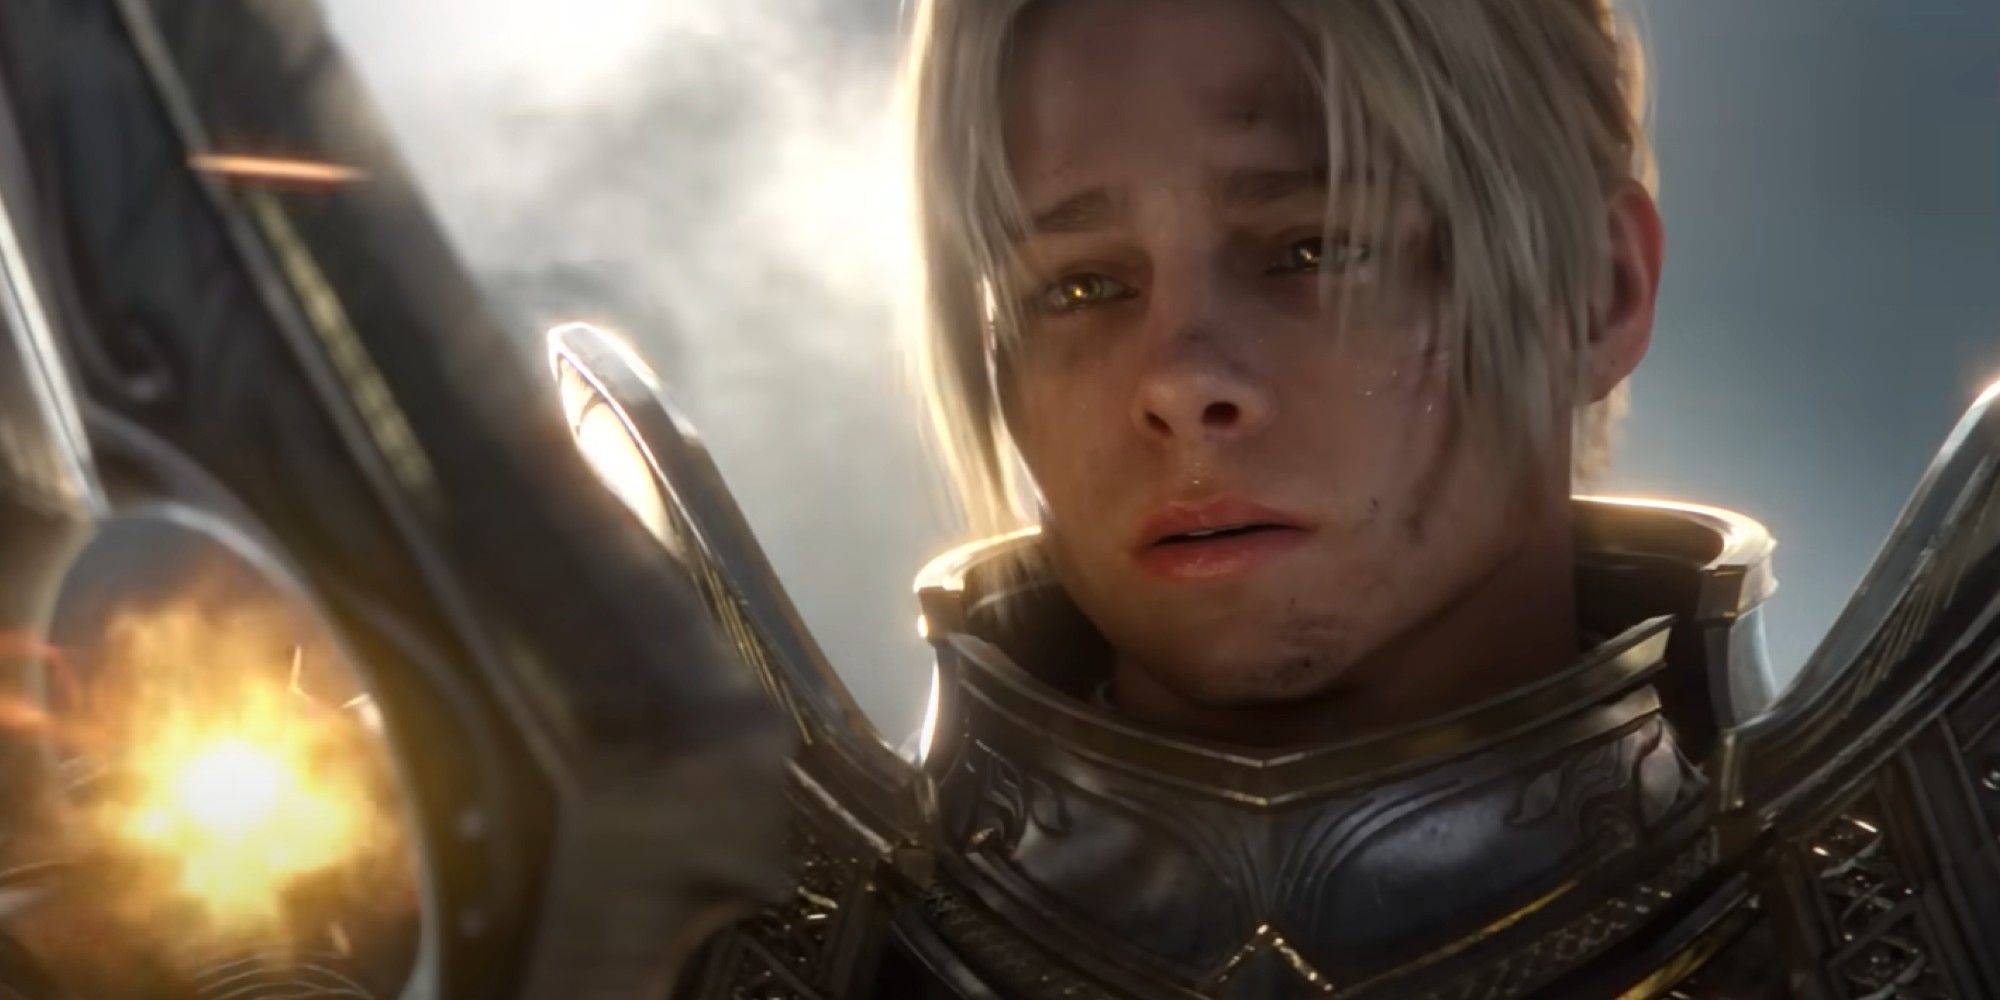 World of Warcraft Anduin in heavy armor during Battle for Azeroth cinematic